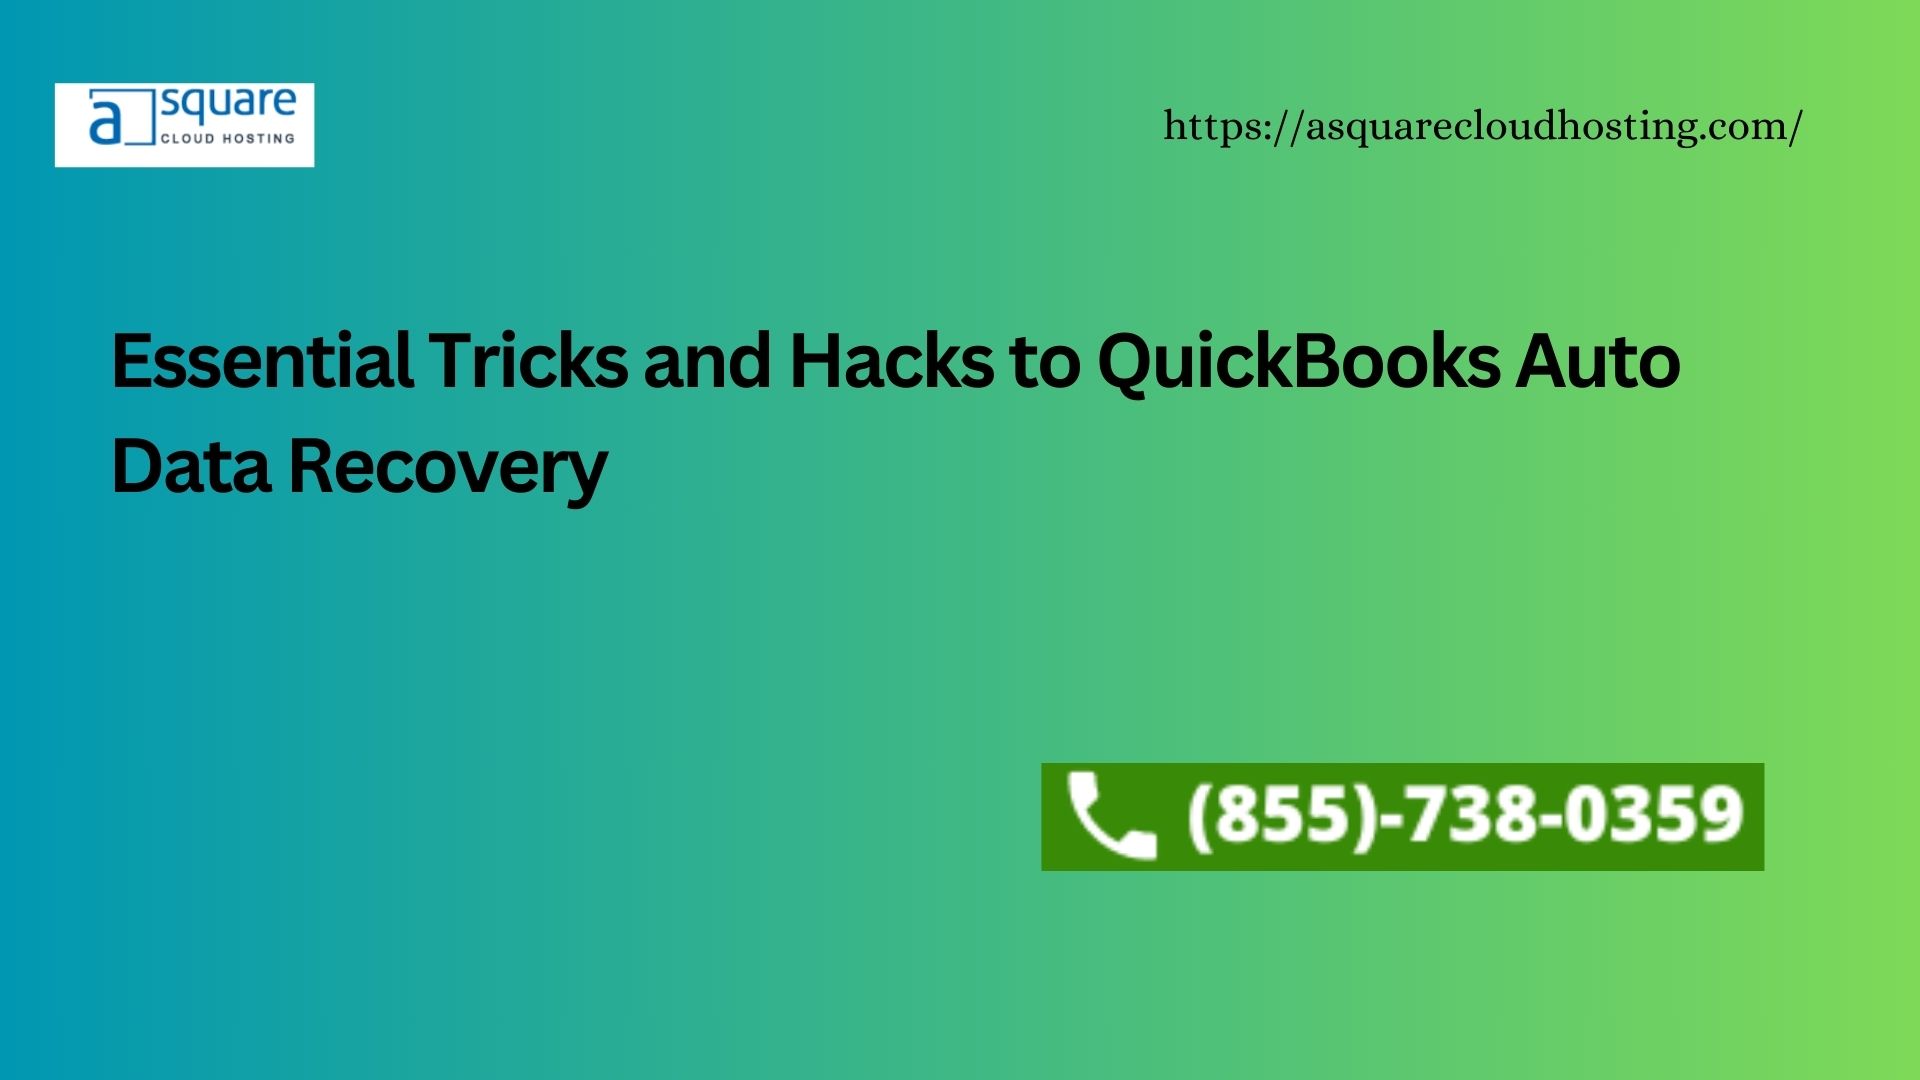 Essential Tricks and Hacks to QuickBooks Auto Data Recovery